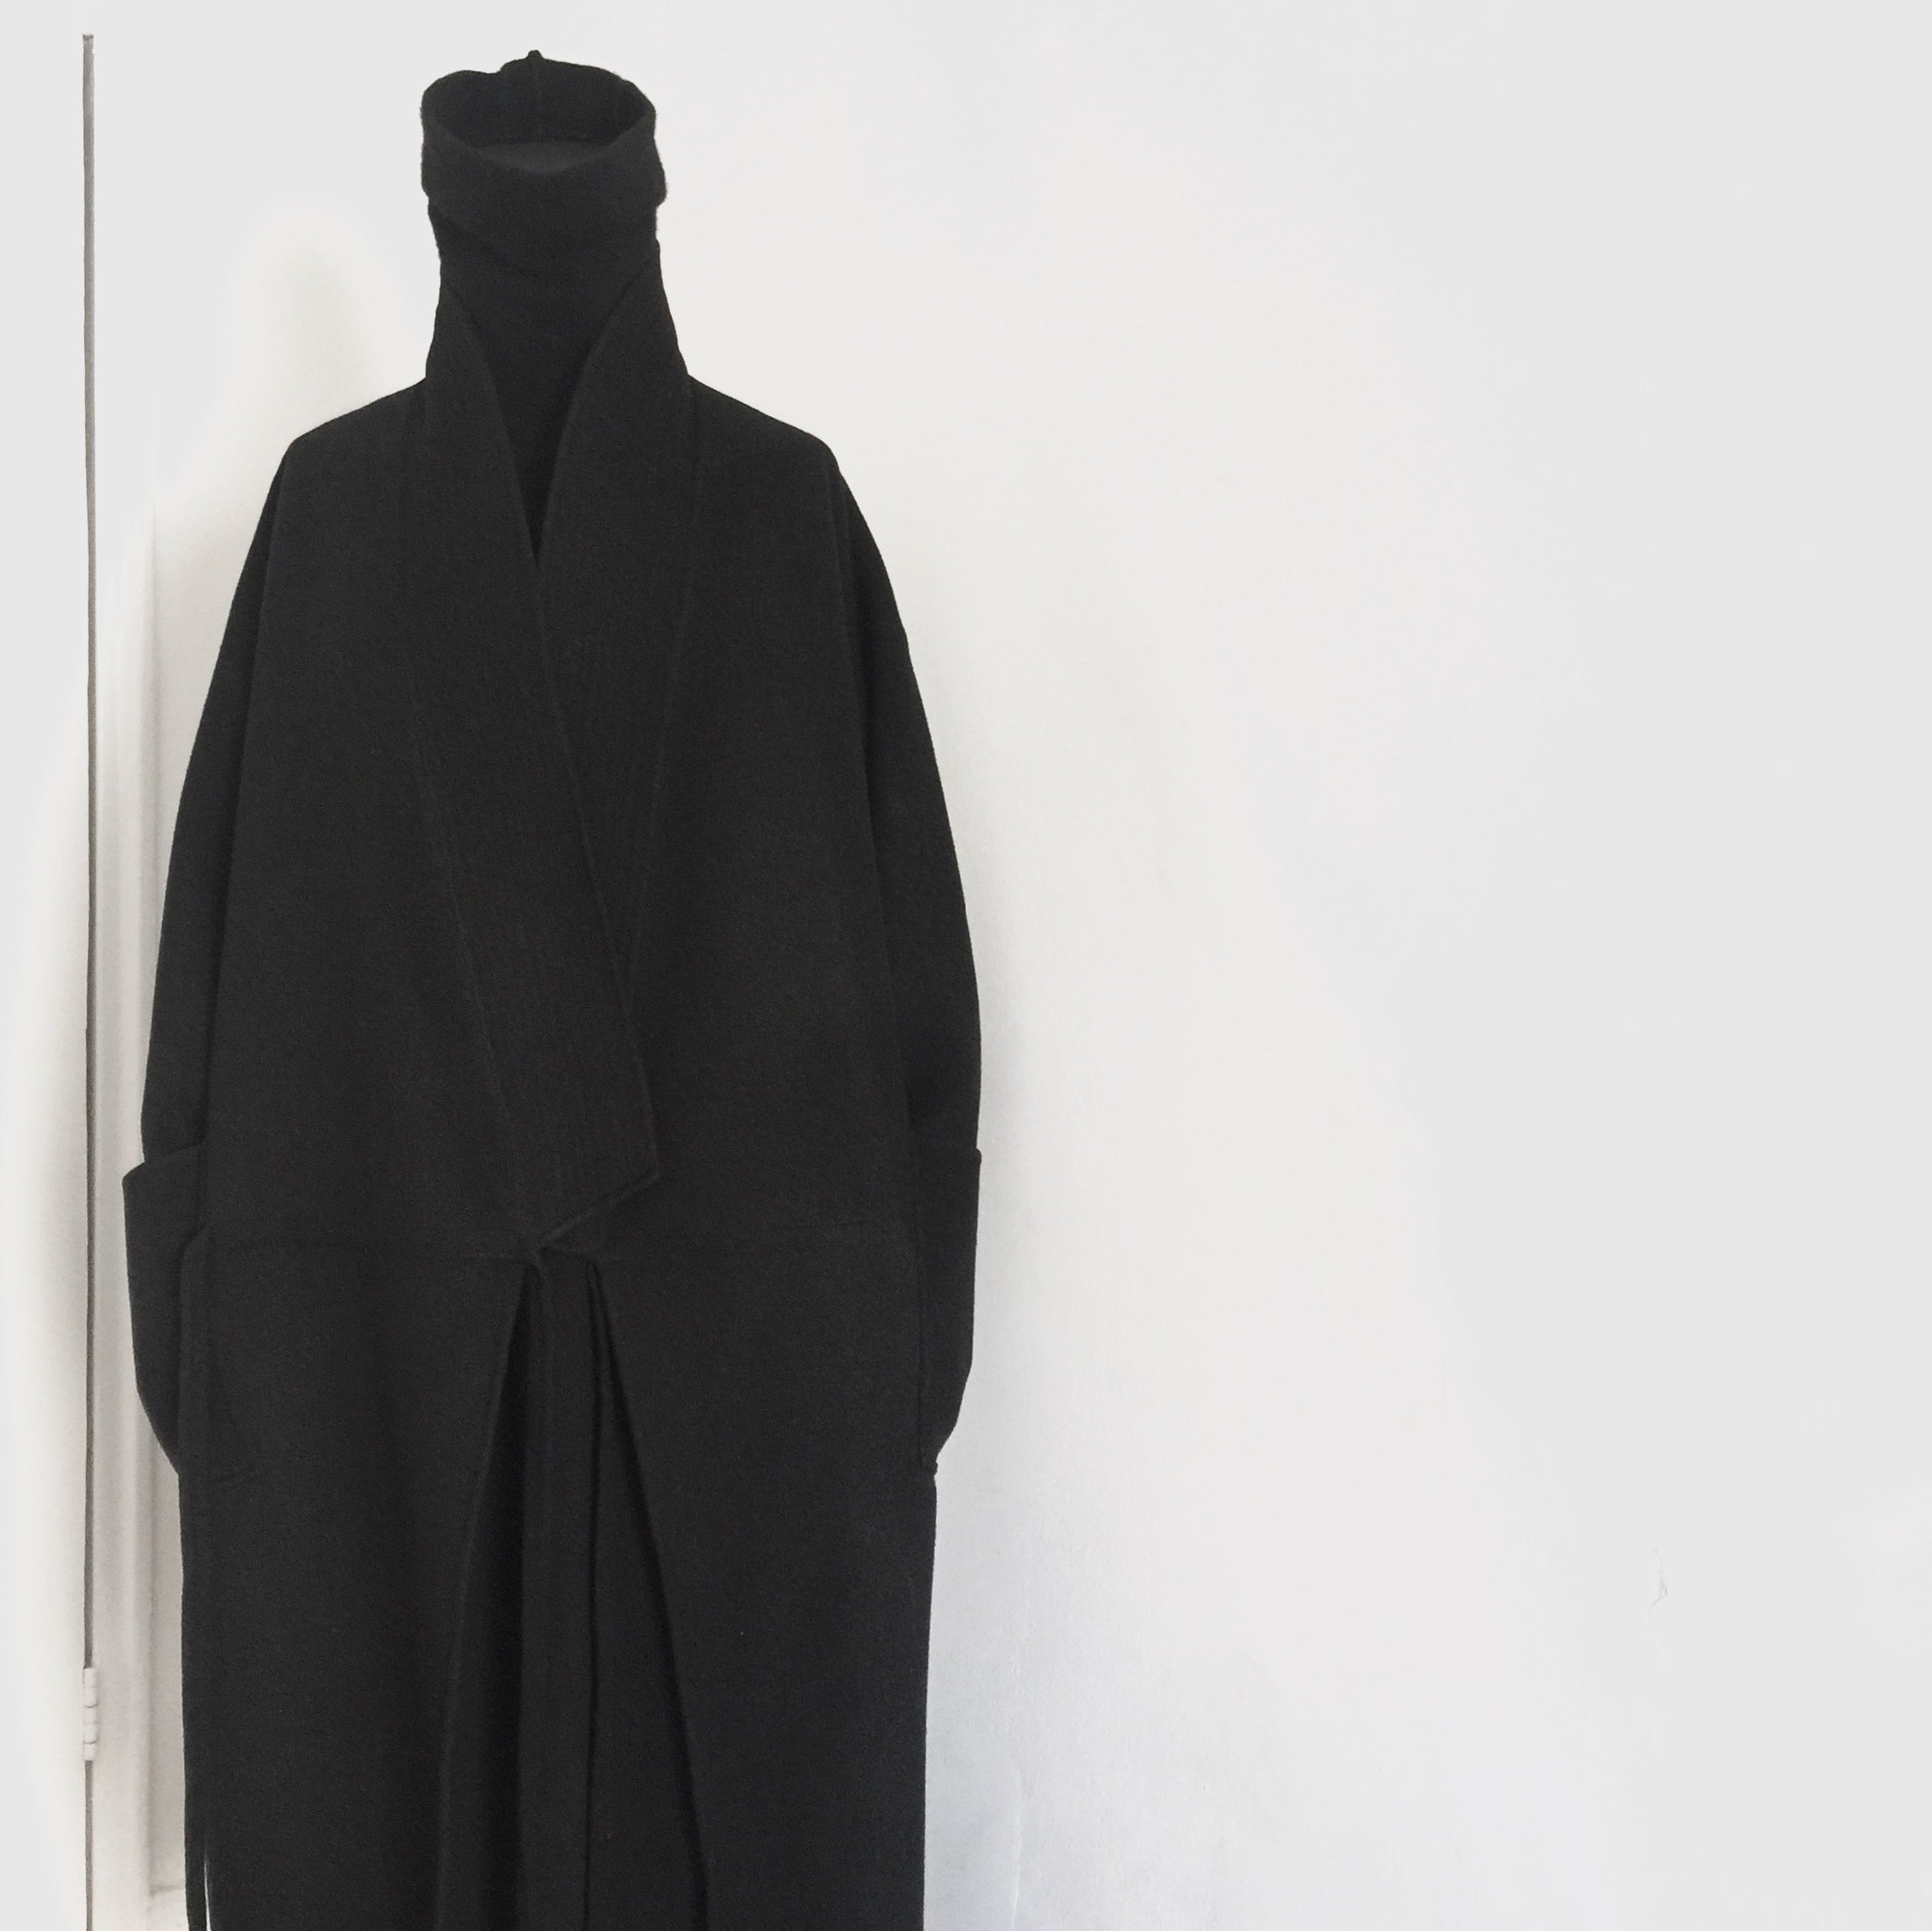 agender | double-face wool, 7/8 agender zencoat...black...made by order